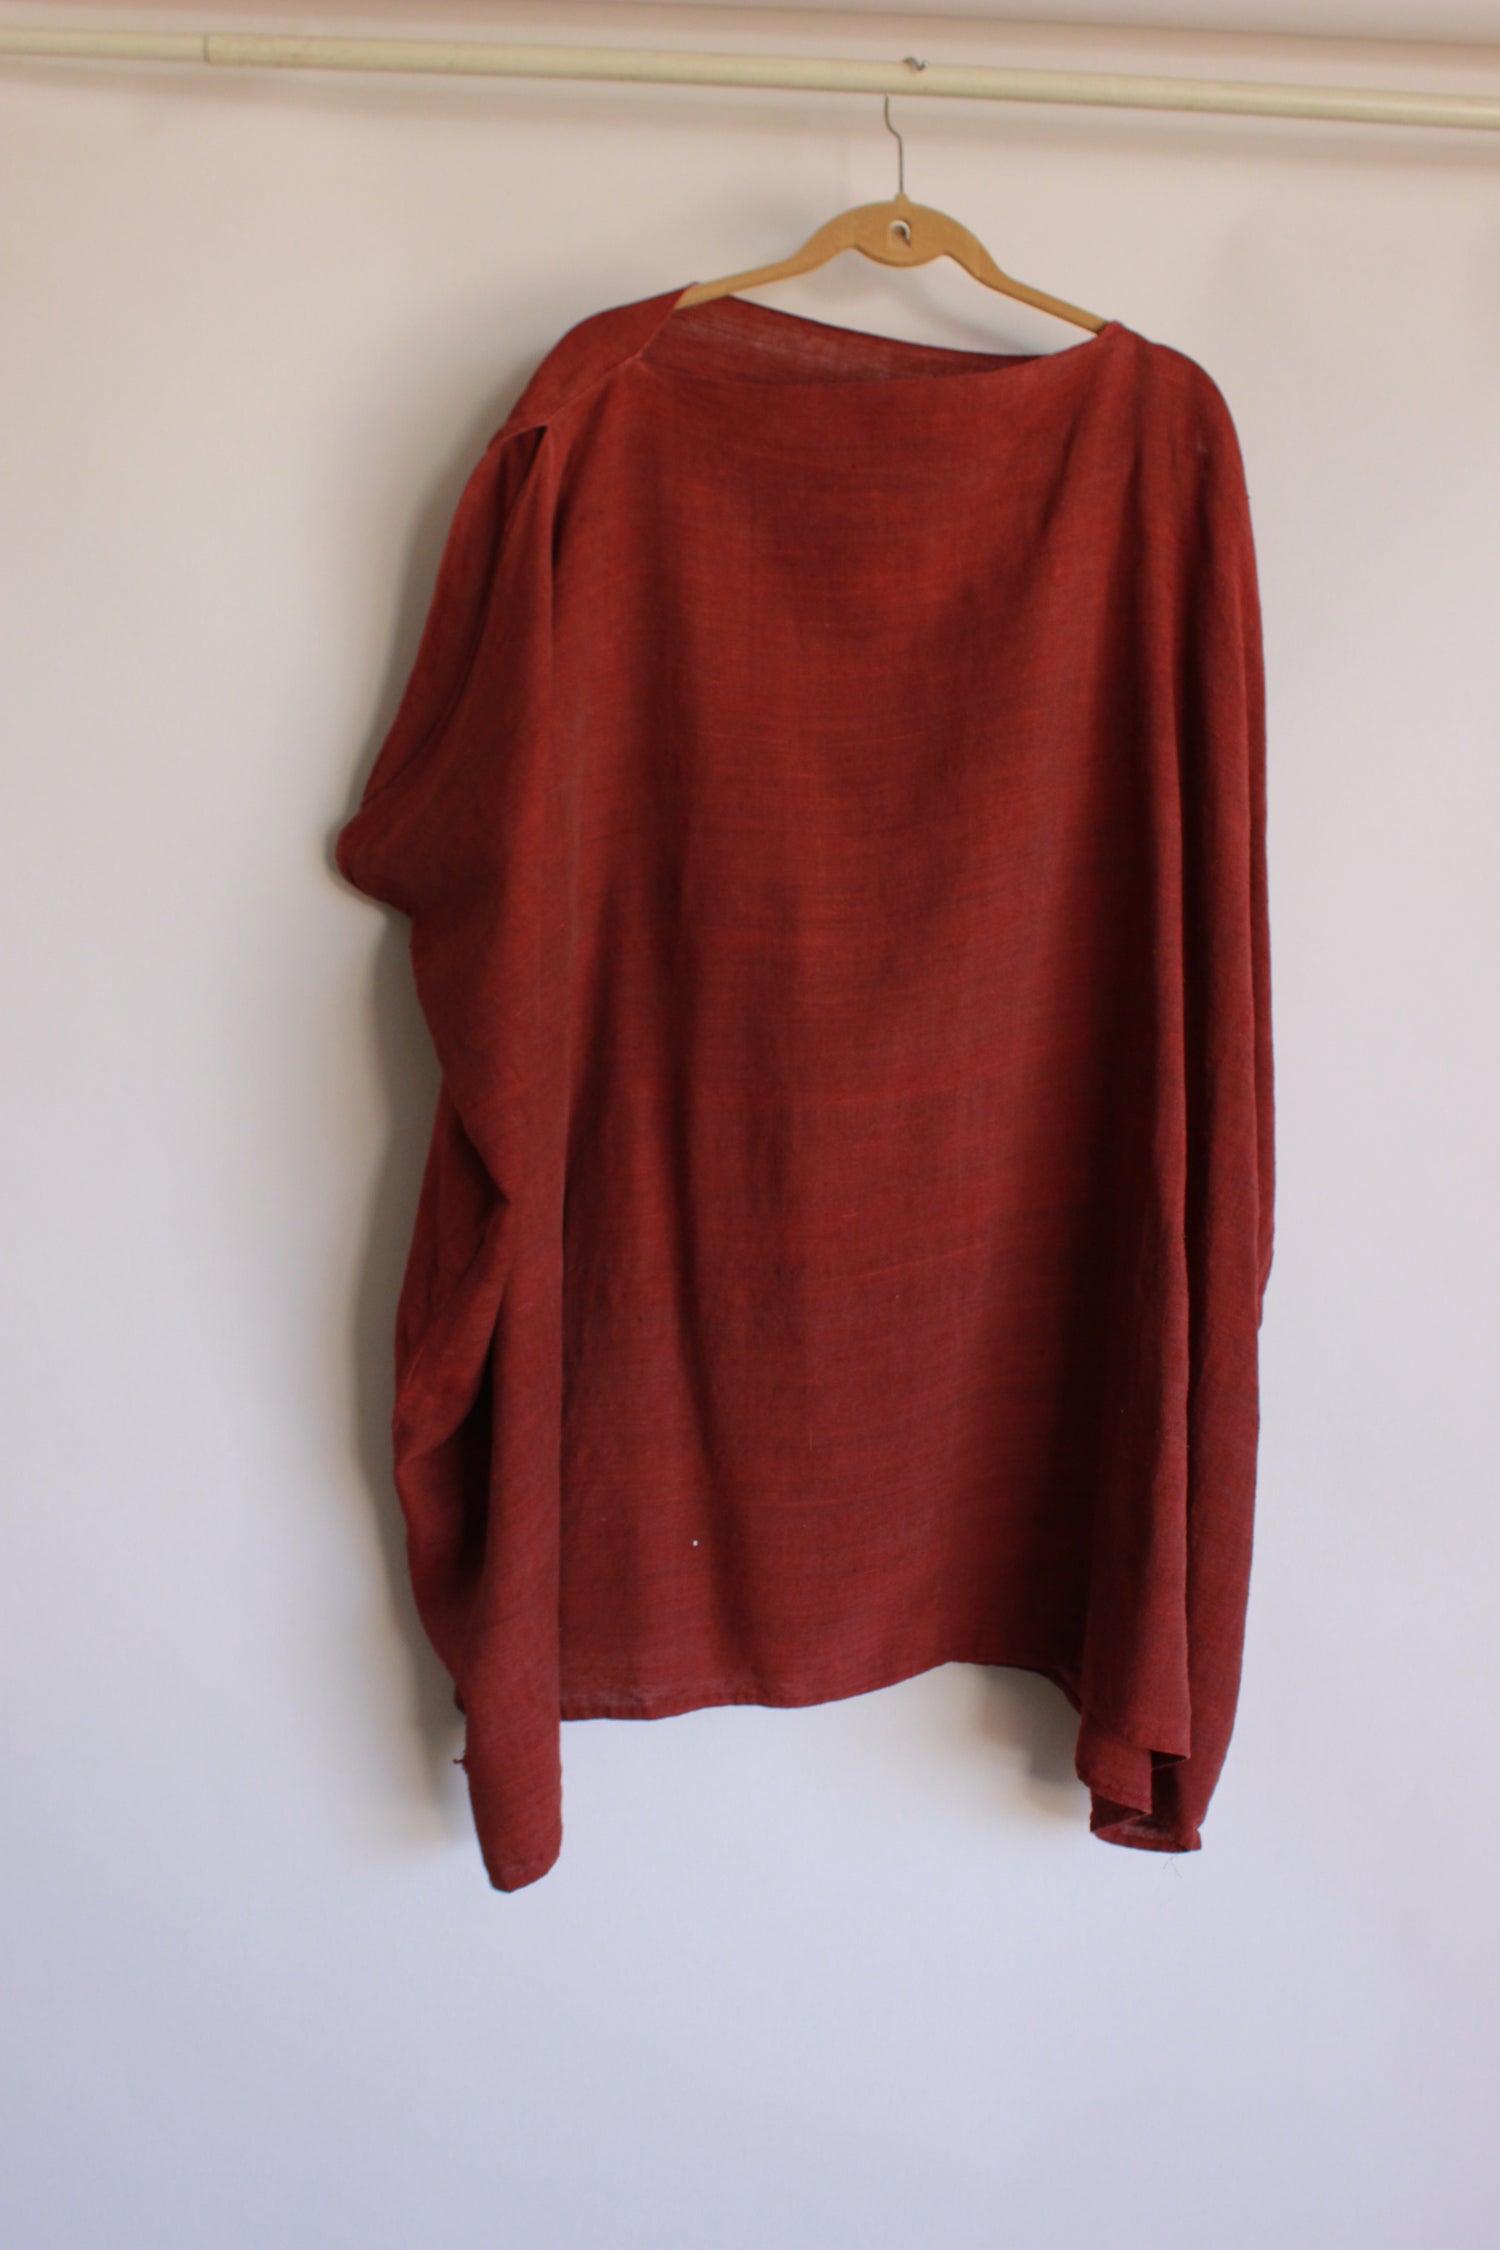 Vintage 1940s Roman Style Tunic in Red